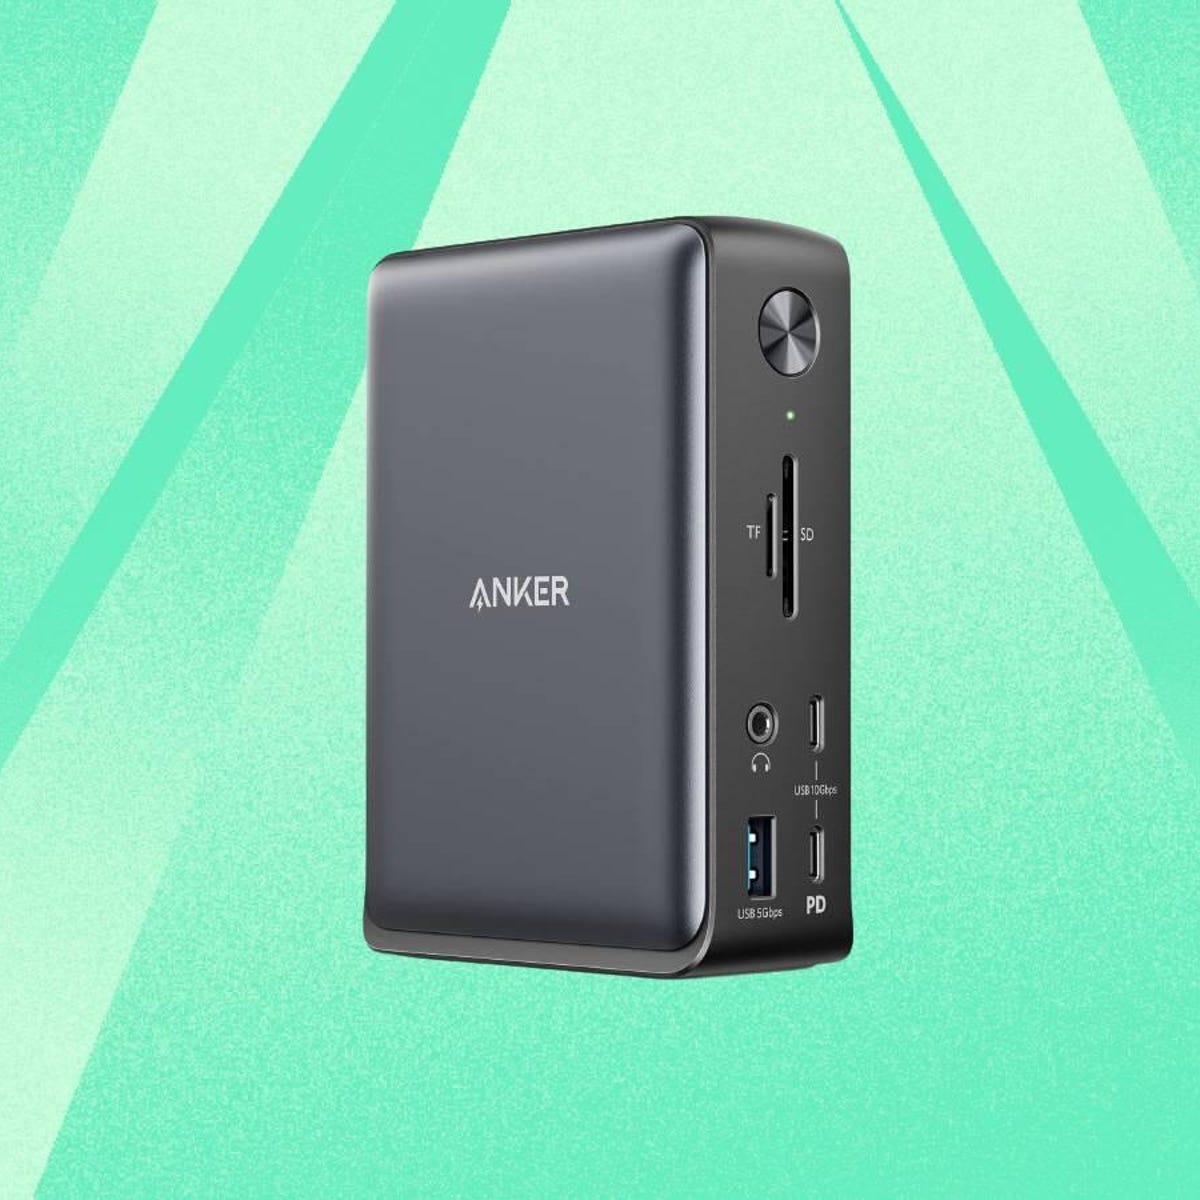 Keep Your Desk Organized With Over 50% Off This 13-in-1 Anker USB